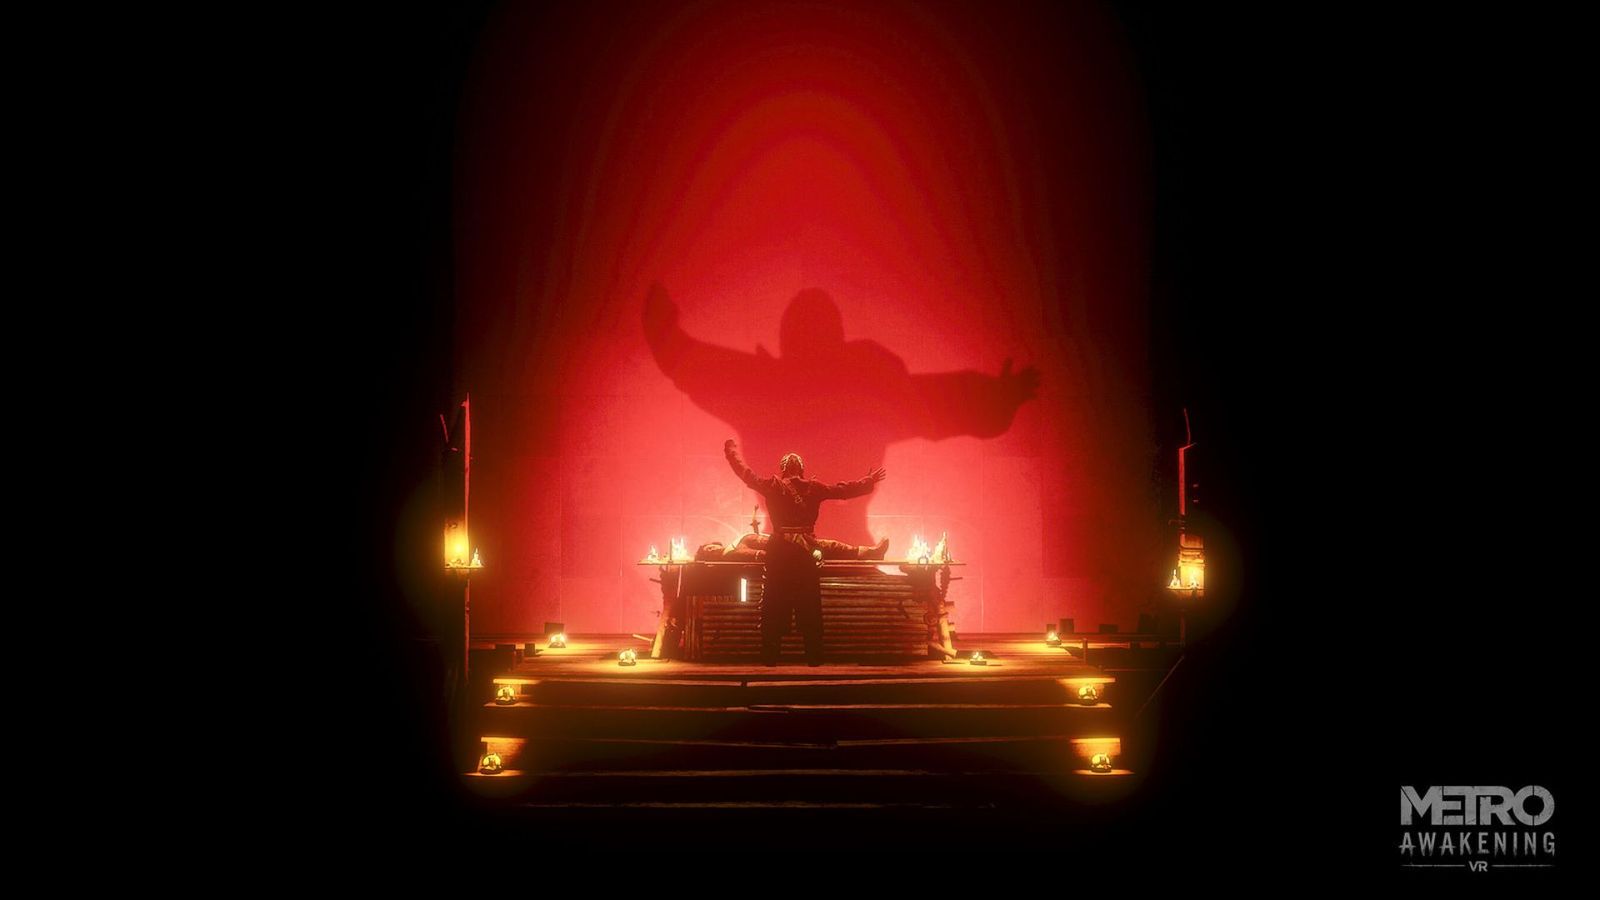 A cultist performing a ritual in Metro Awakening VR